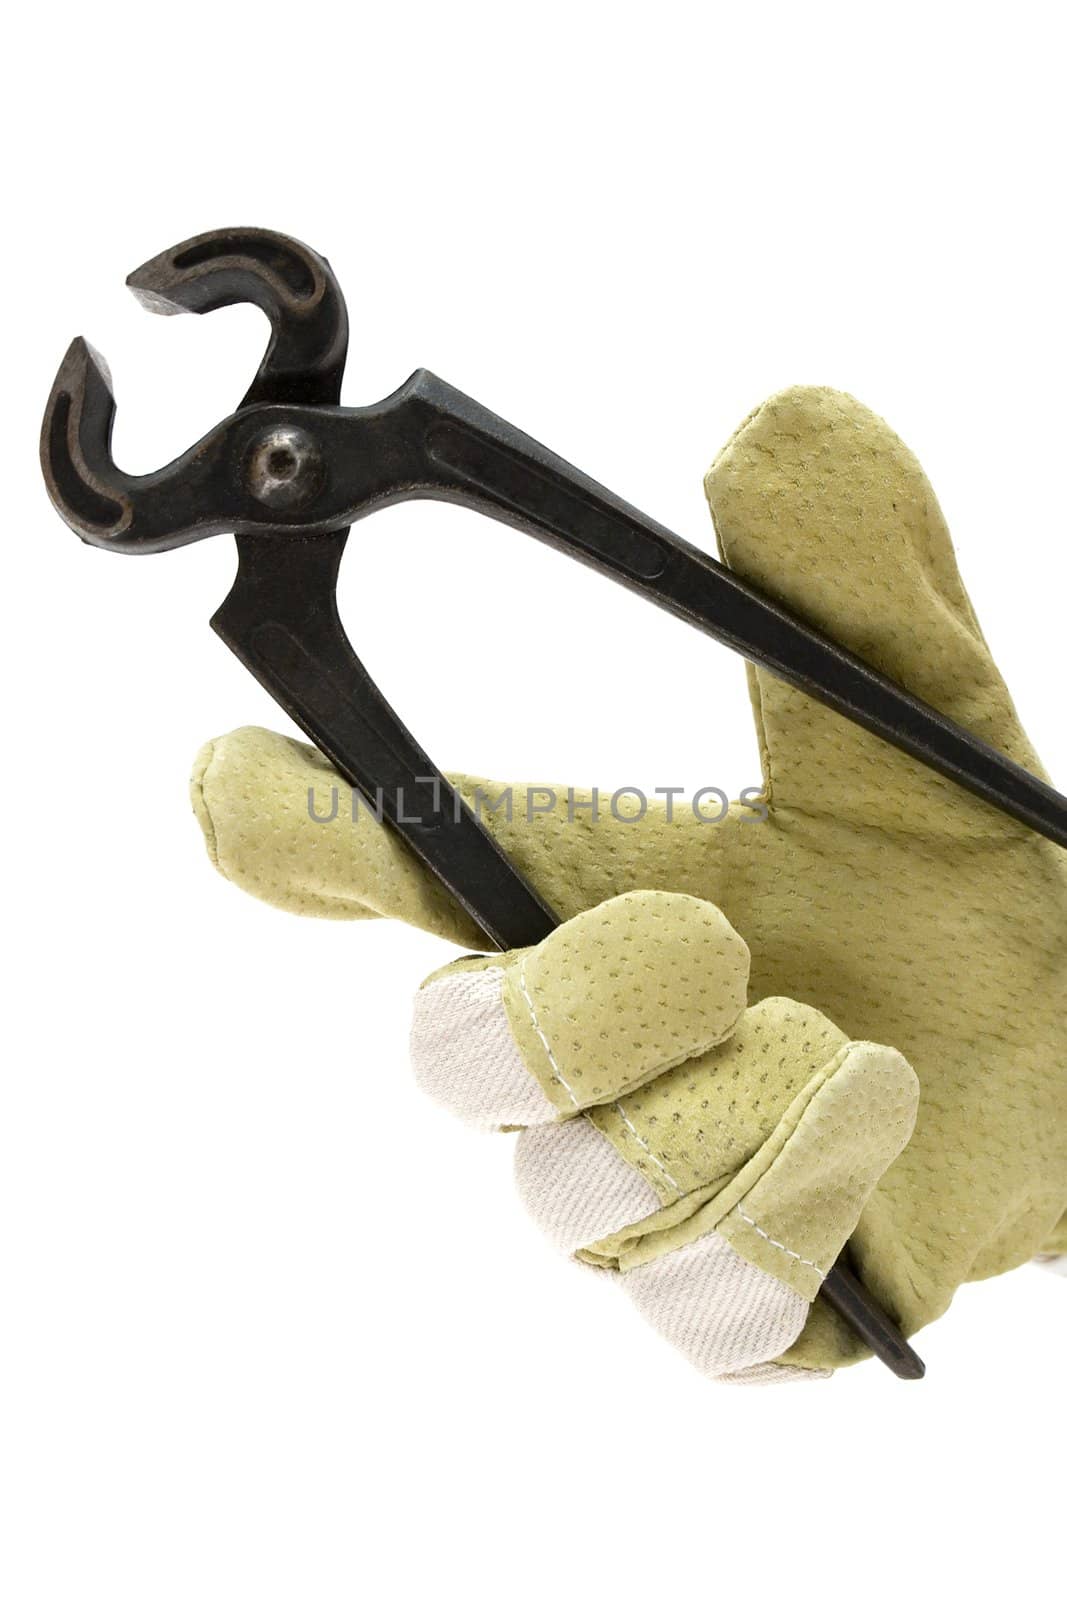 Gloved hand holding a working tool. Isolated on a white background.